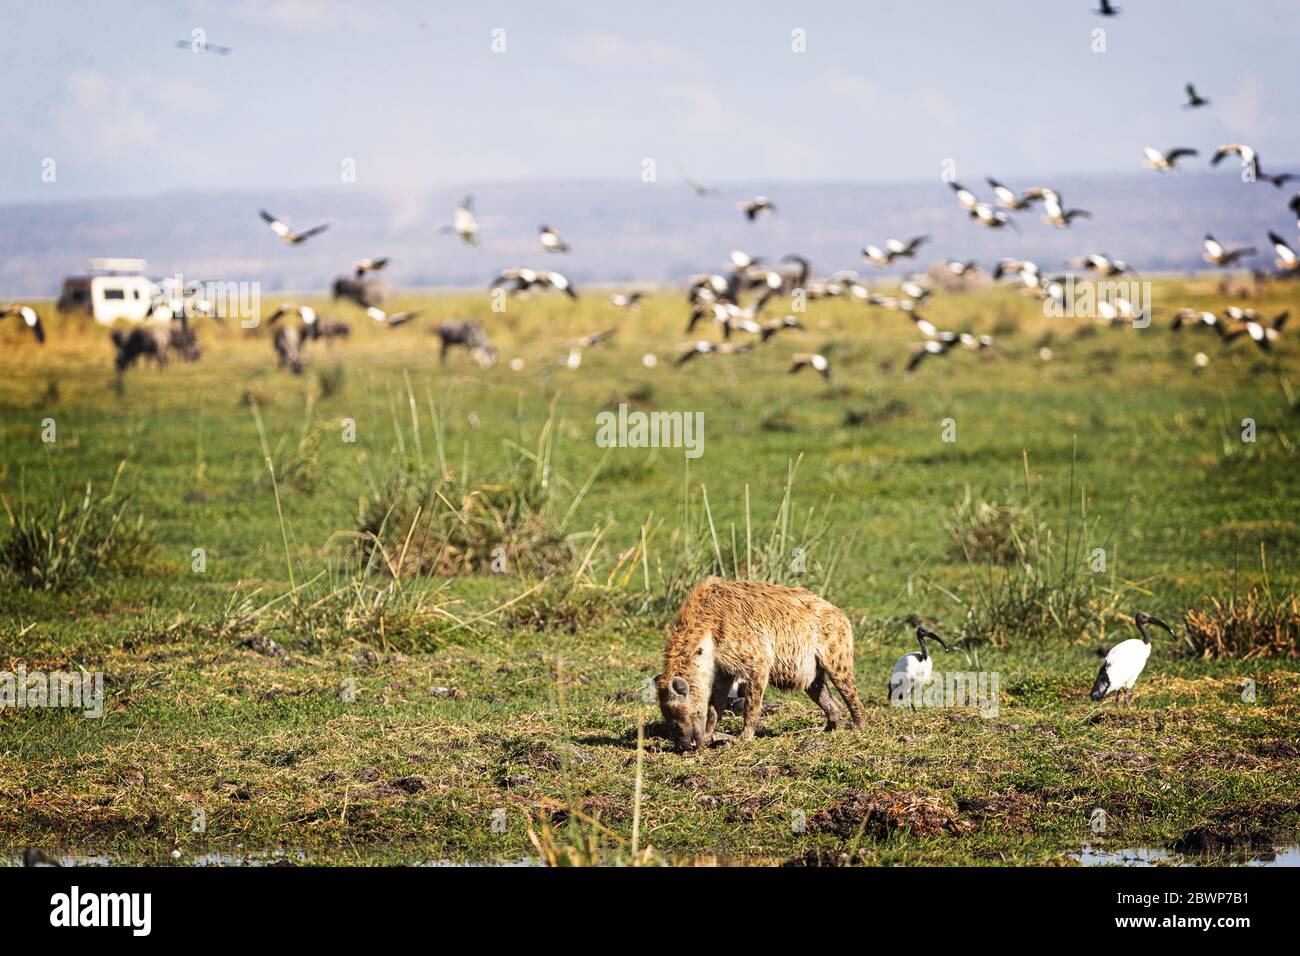 African safari scene of hyena eating carcass with flock of birds flying and safari vehicle in background Stock Photo